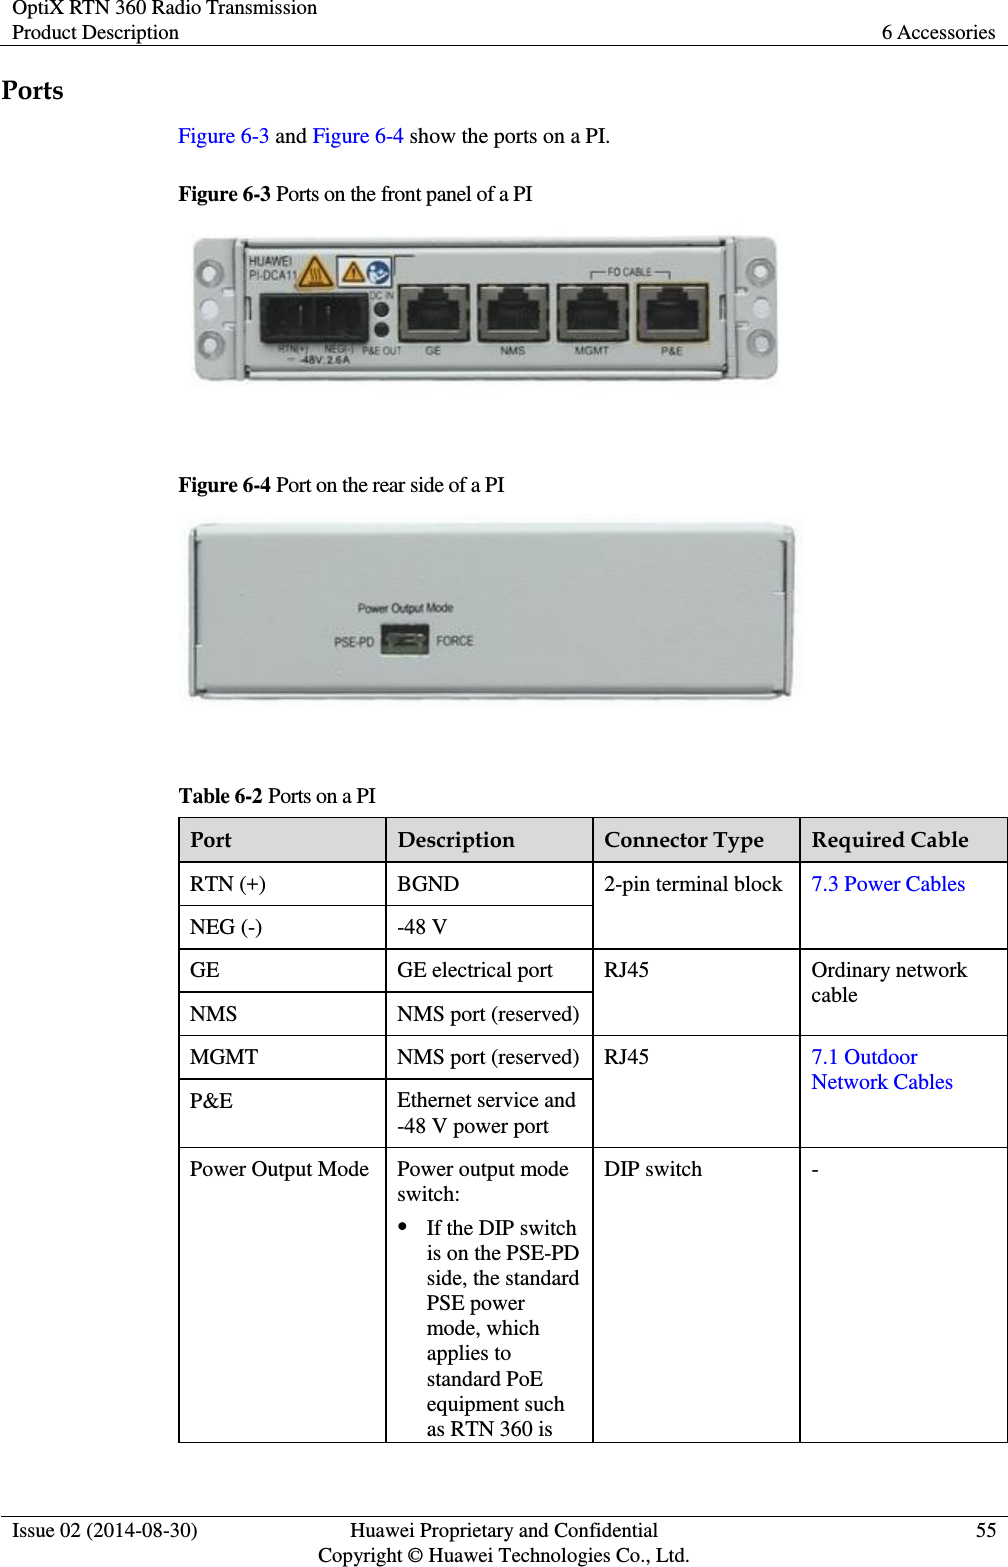 OptiX RTN 360 Radio Transmission Product Description 6 Accessories  Issue 02 (2014-08-30) Huawei Proprietary and Confidential                                     Copyright © Huawei Technologies Co., Ltd. 55  Ports Figure 6-3 and Figure 6-4 show the ports on a PI. Figure 6-3 Ports on the front panel of a PI   Figure 6-4 Port on the rear side of a PI   Table 6-2 Ports on a PI Port Description Connector Type Required Cable RTN (+) BGND 2-pin terminal block 7.3 Power Cables NEG (-) -48 V GE GE electrical port RJ45 Ordinary network cable NMS NMS port (reserved) MGMT NMS port (reserved) RJ45 7.1 Outdoor Network Cables P&amp;E Ethernet service and -48 V power port Power Output Mode Power output mode switch:  If the DIP switch is on the PSE-PD side, the standard PSE power mode, which applies to standard PoE equipment such as RTN 360 is DIP switch - 